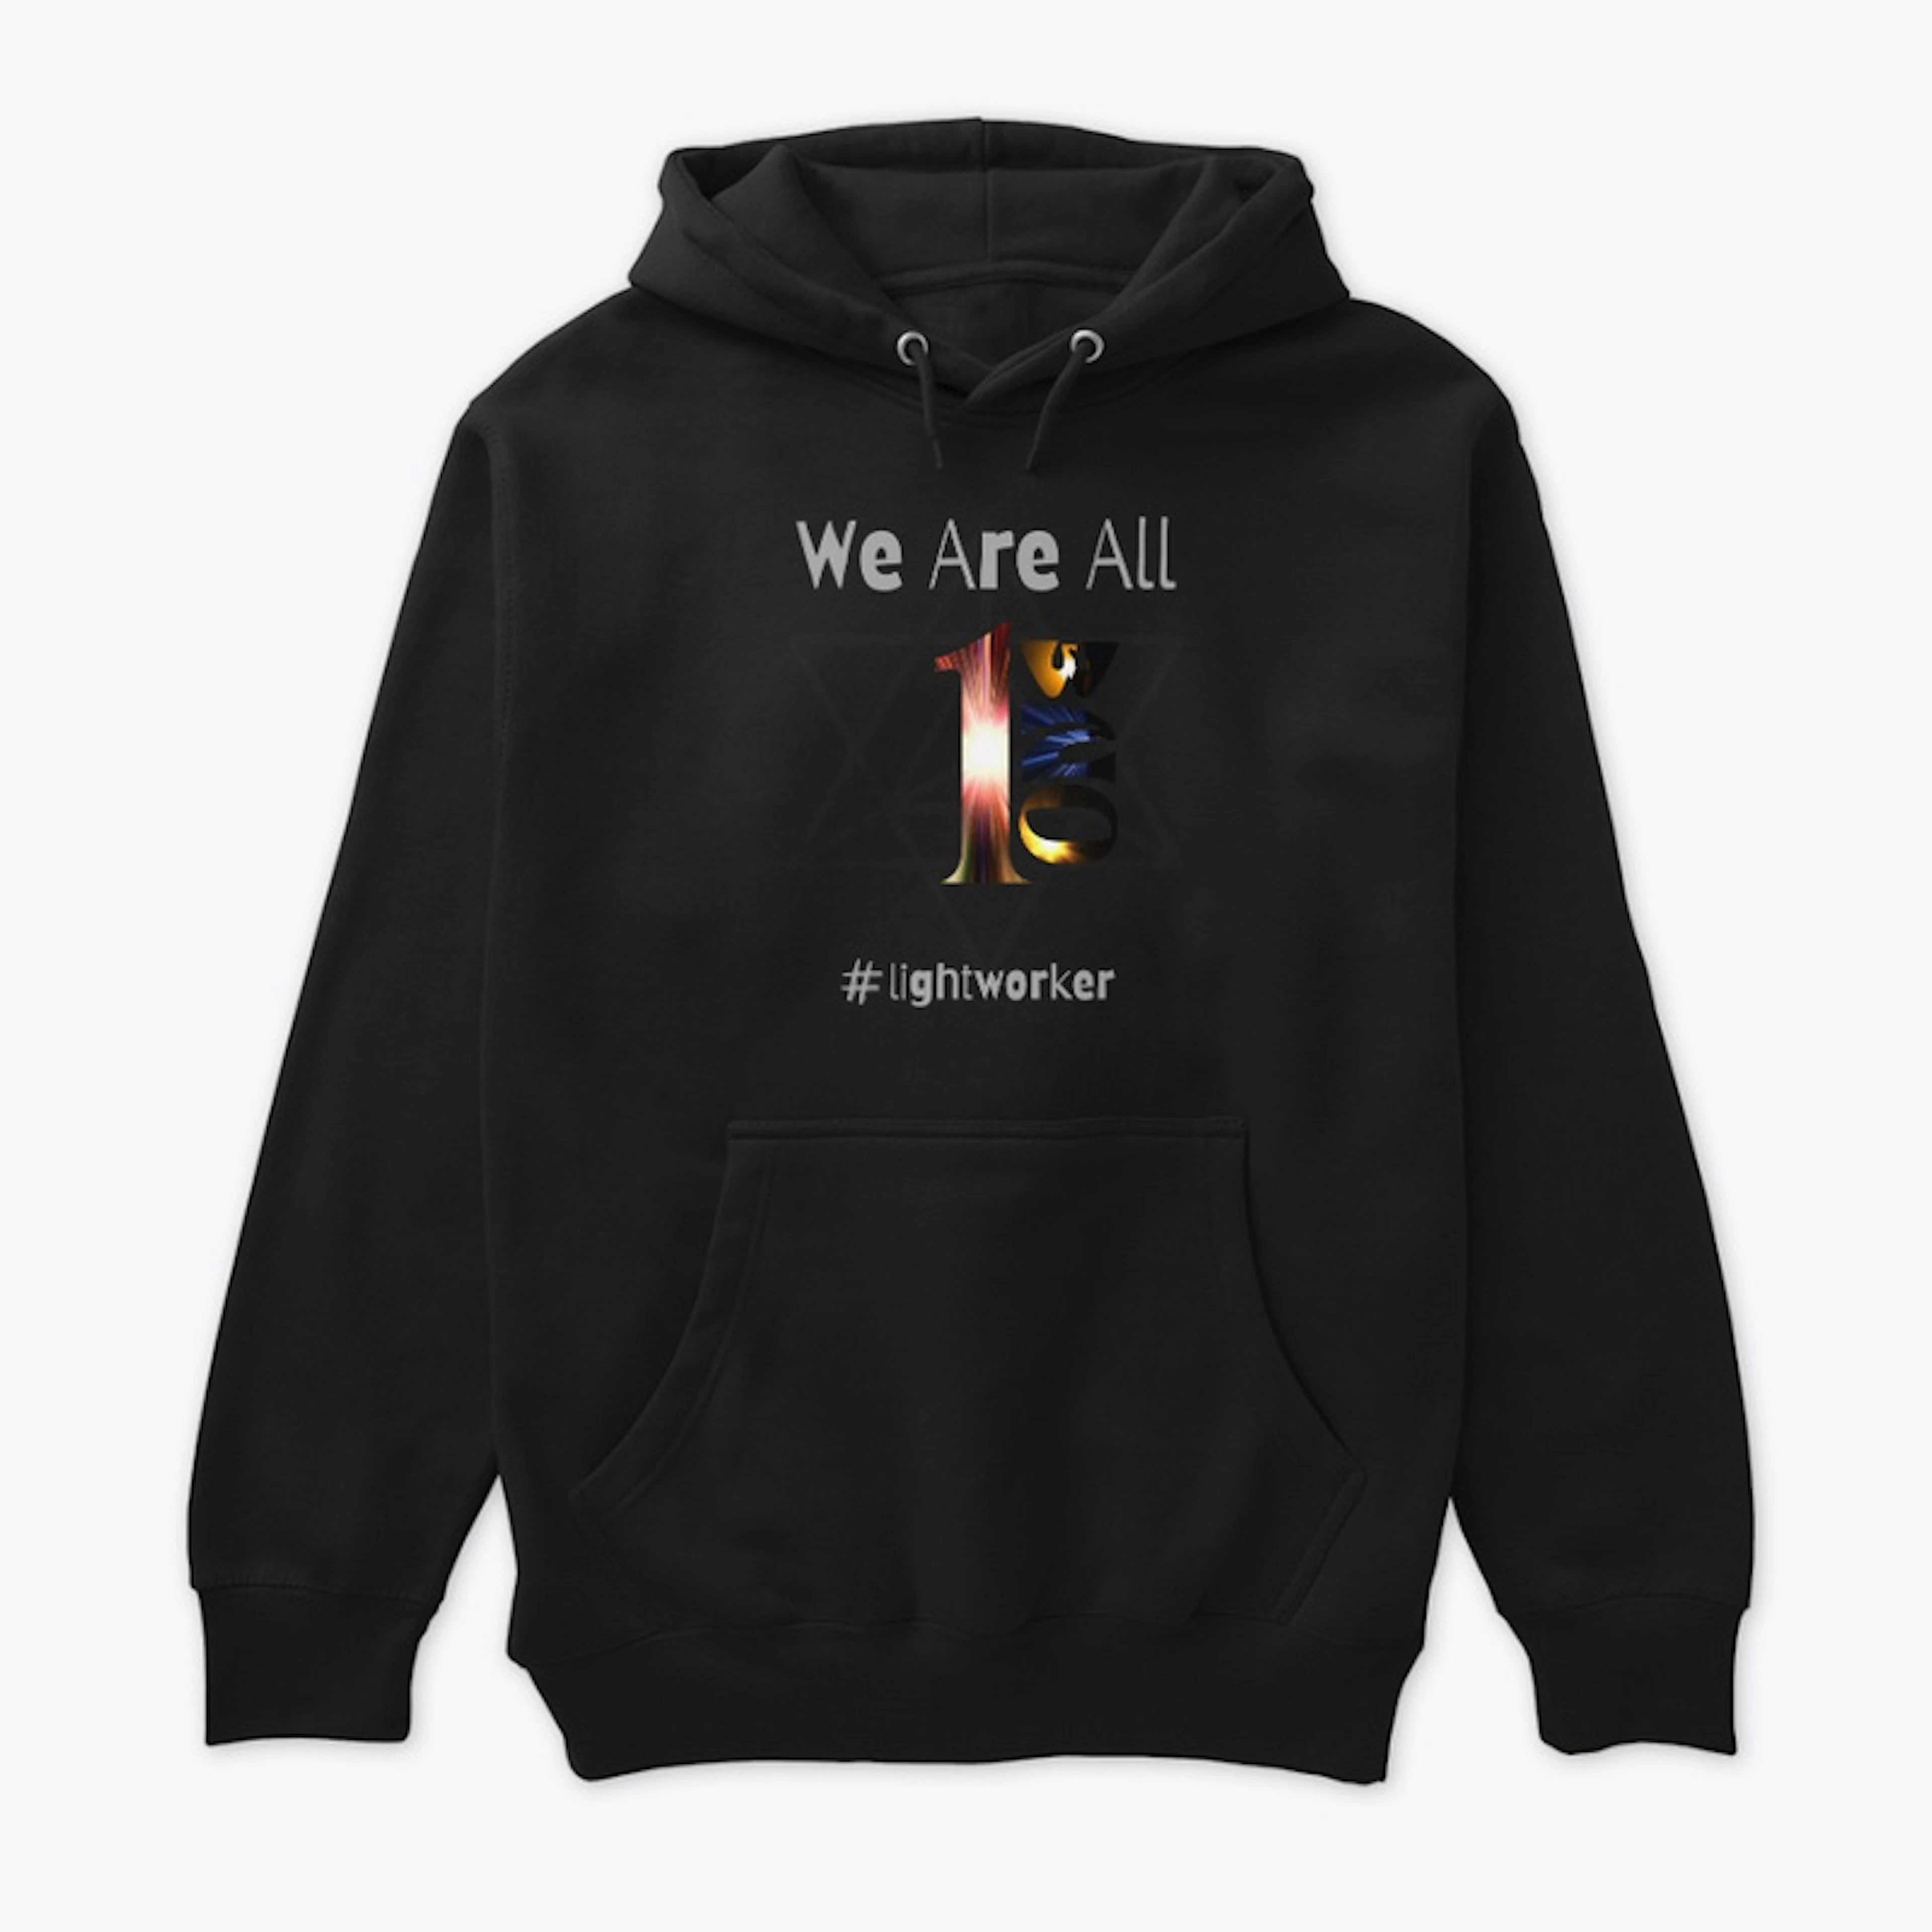 We Are All One #Lightworker Hoodie